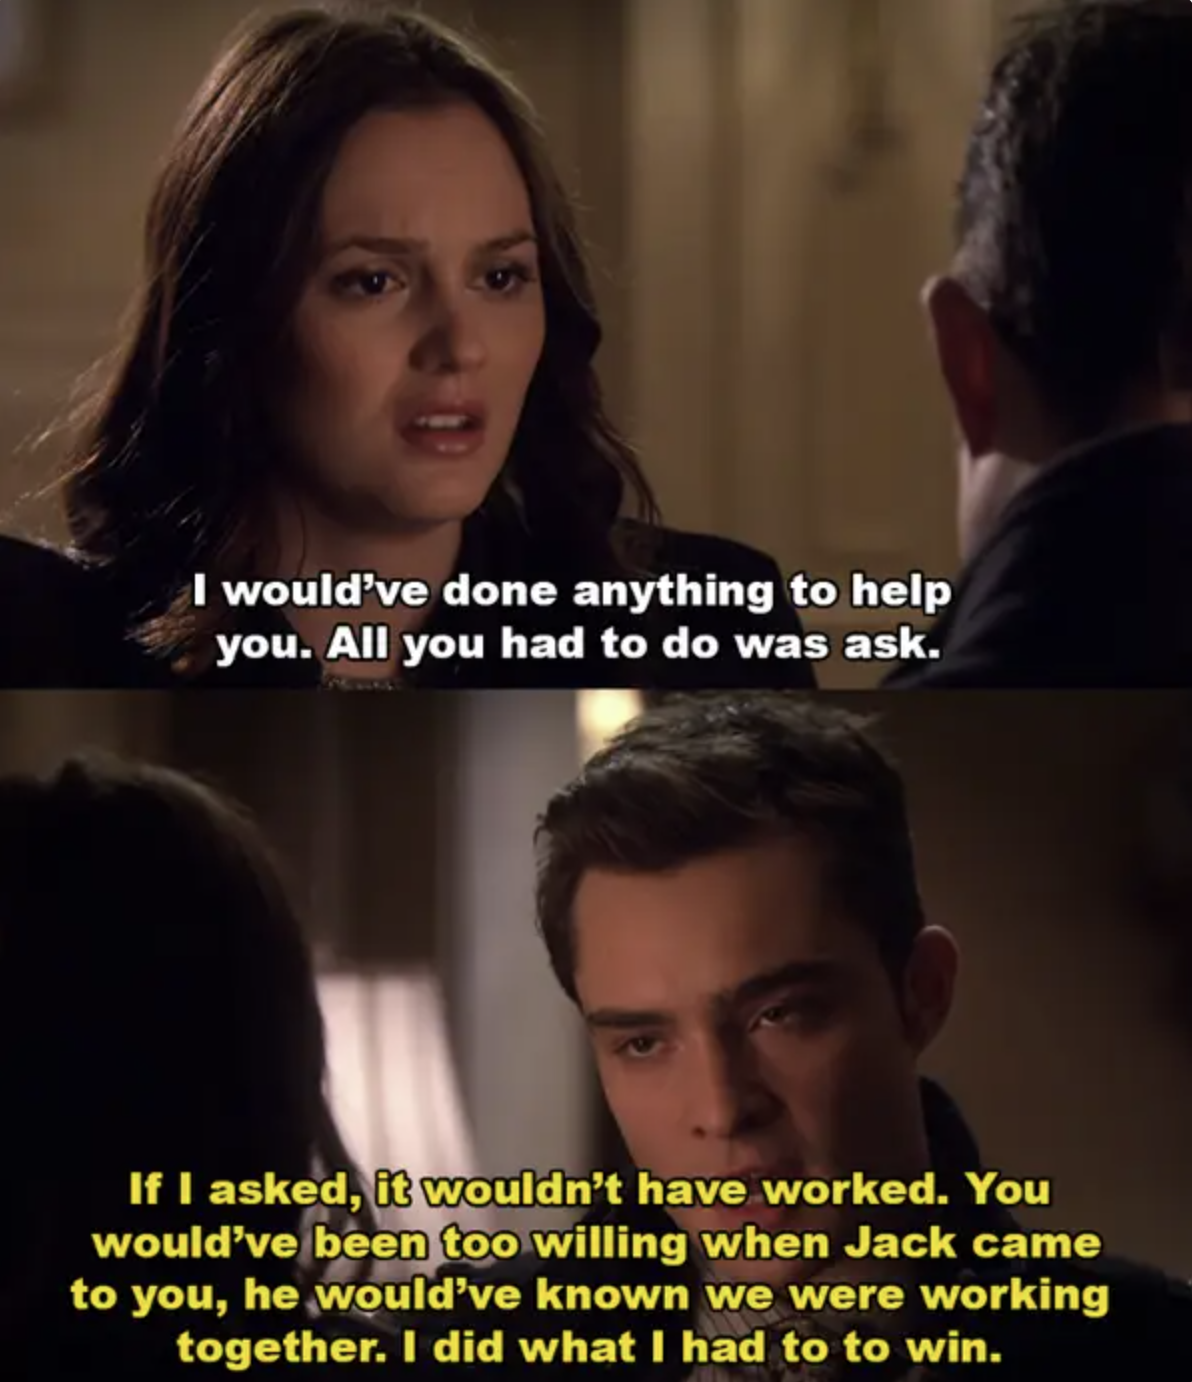 Blair says she would have done anything to help Chuck if he&#x27;d asked, Chuck said that wouldn&#x27;t have worked if she was &quot;too willing&quot; and that he did what he had to do to win